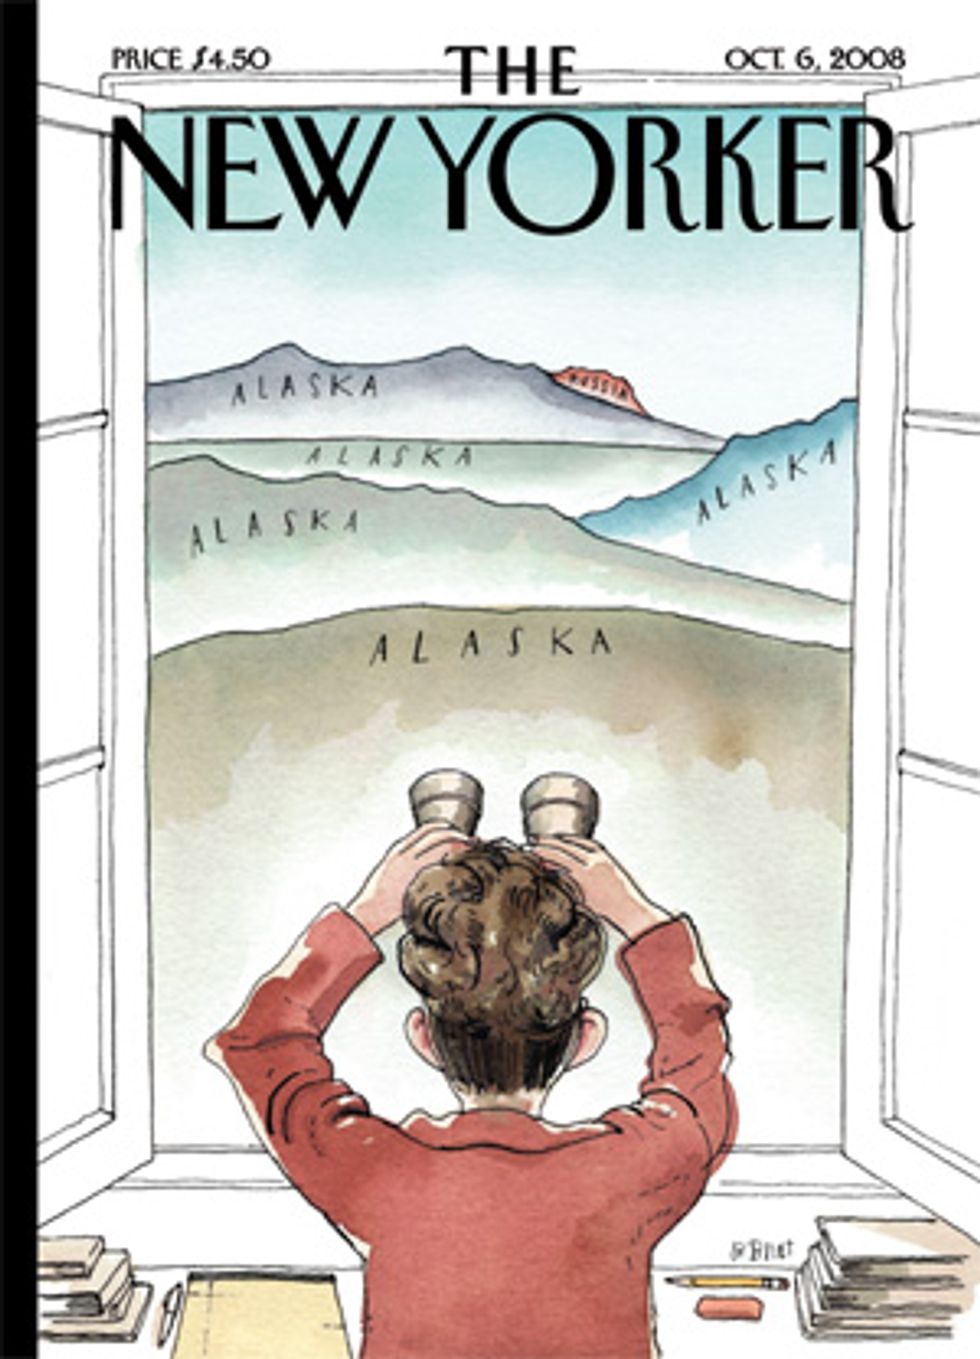 New Yorker Cover Doesn't Respect Sarah Palin's Foreign Policy Experience, Either